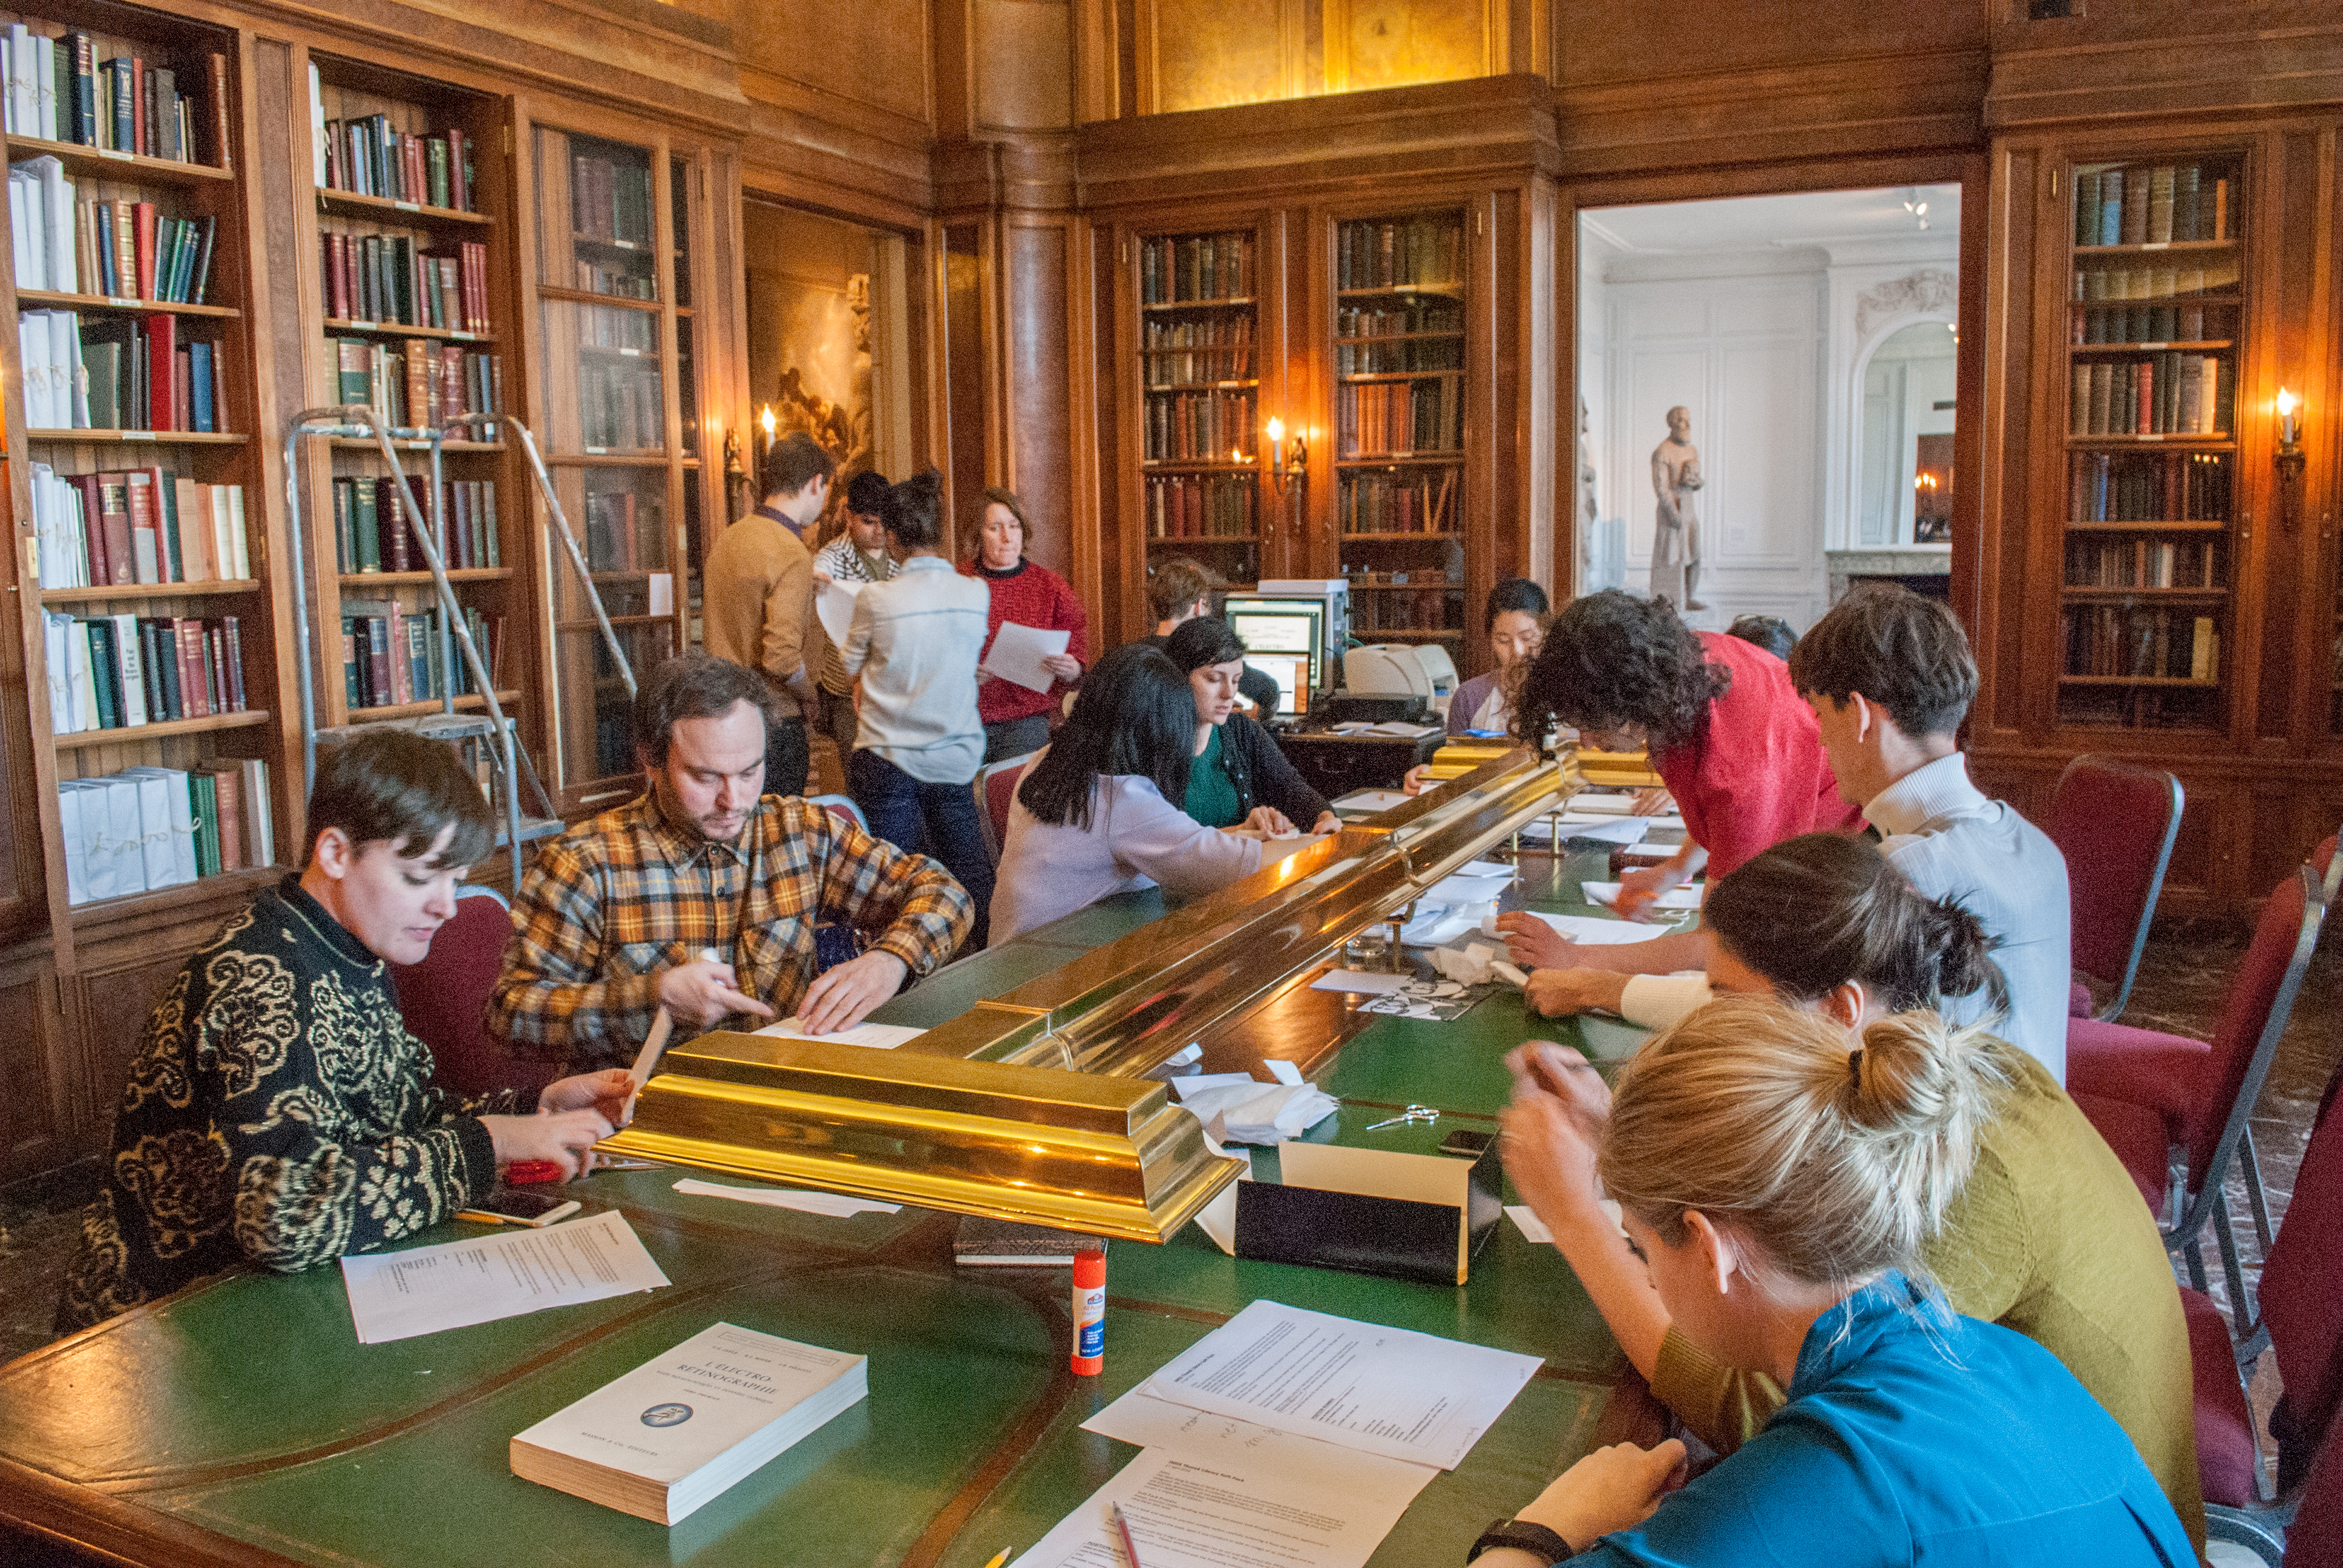 The volunteer team working in the library on April 17, 2016